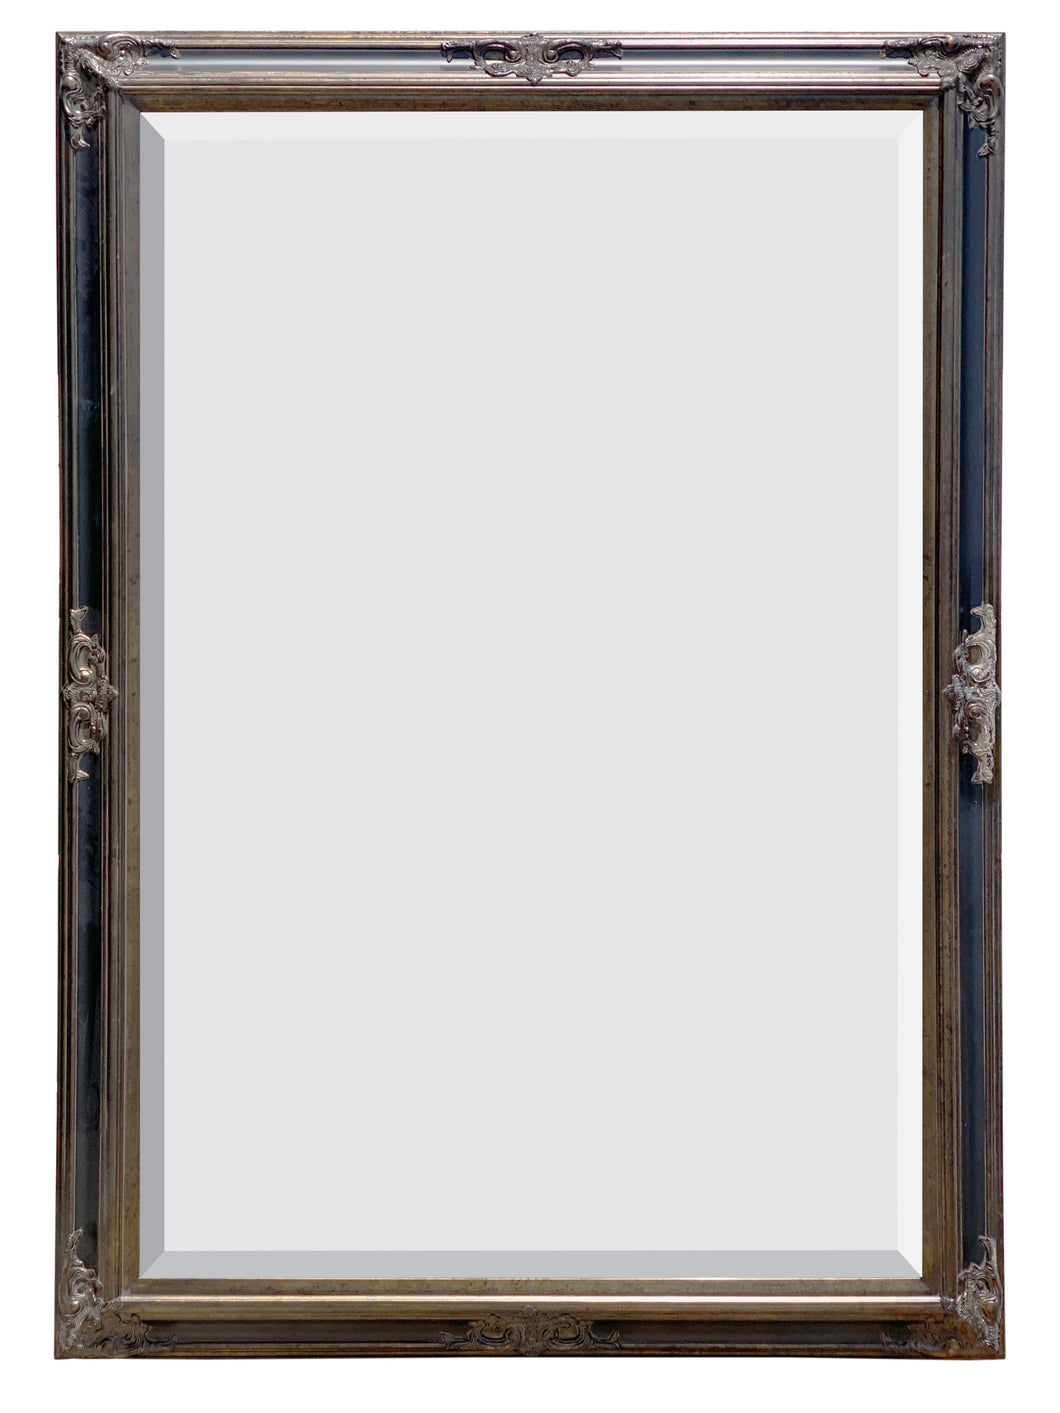 Grand Victorian Mirror 48x72 Antique Gold with Black